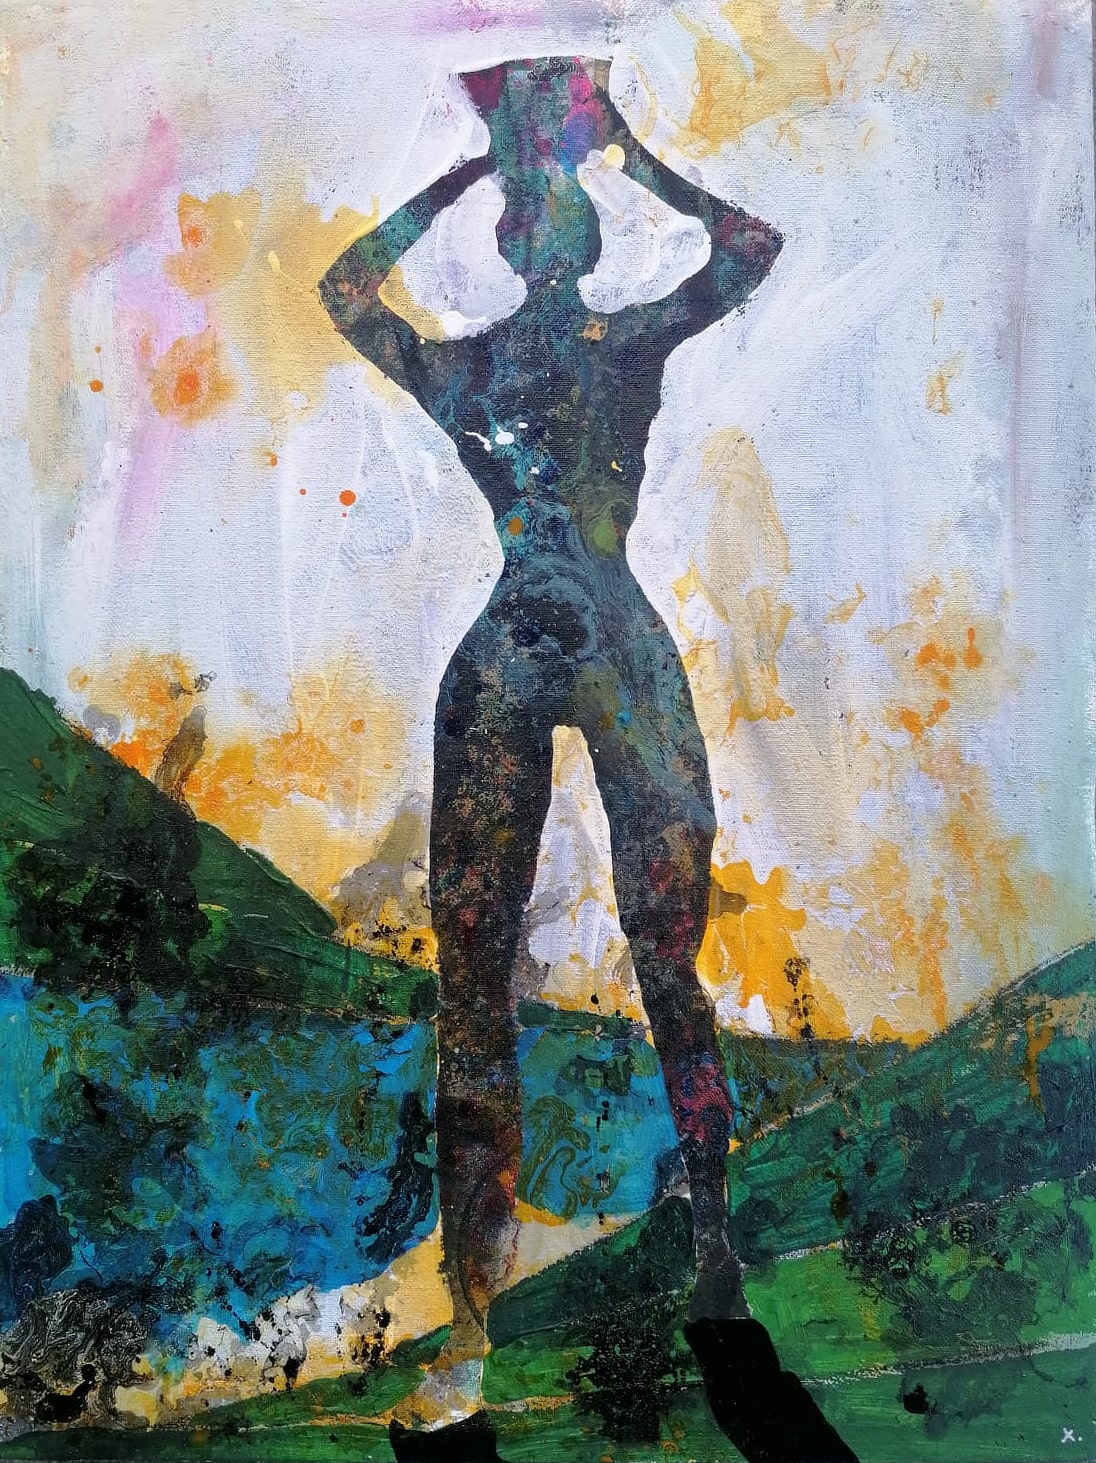 A black figure in front of explosive colour melange - a painting by Deanio x